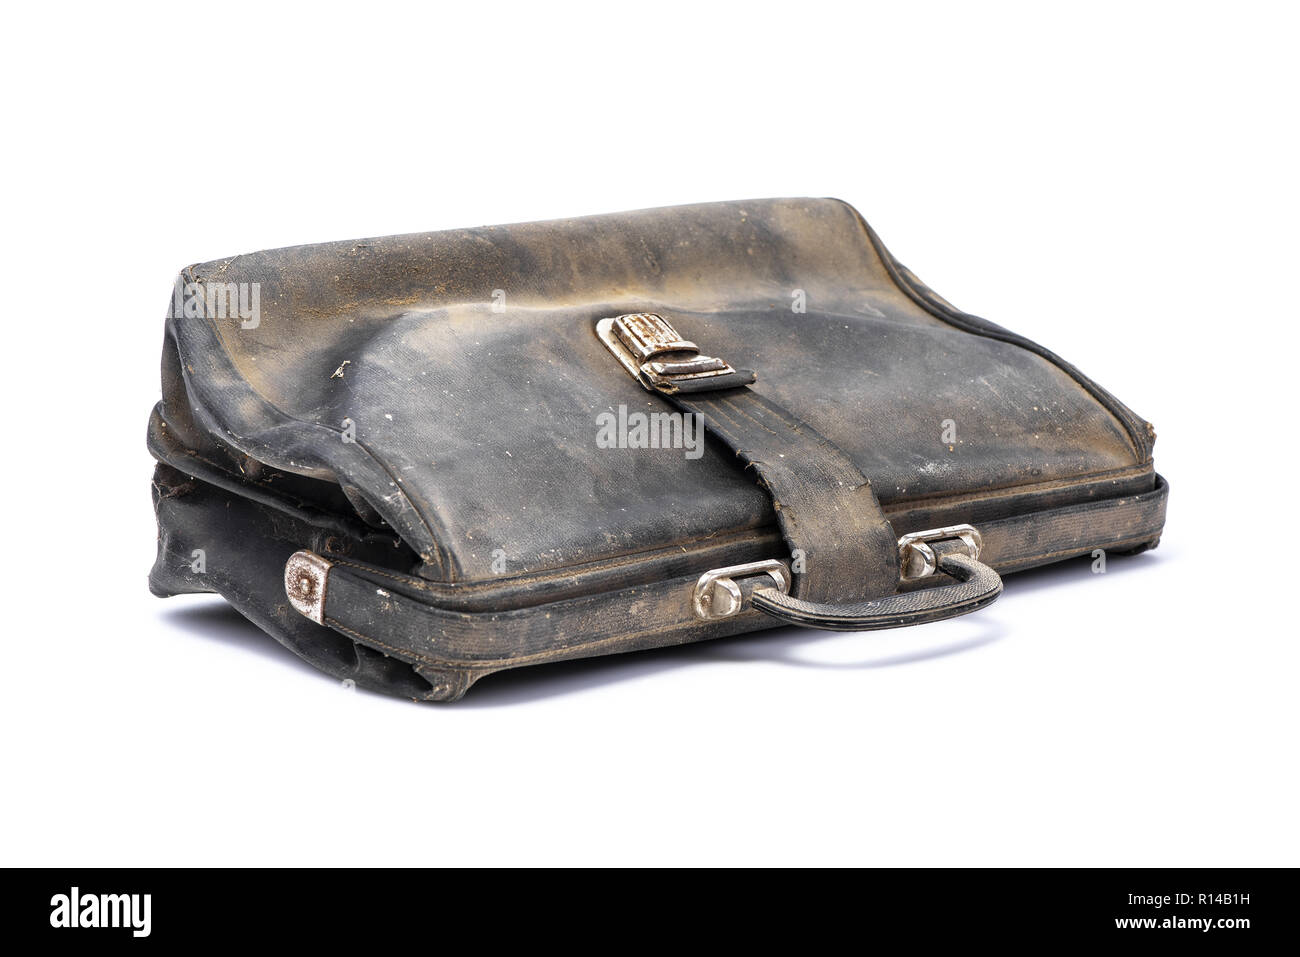 Retro briefcase, black leather flapover, covered with dust, isolated on white background with shadow Stock Photo